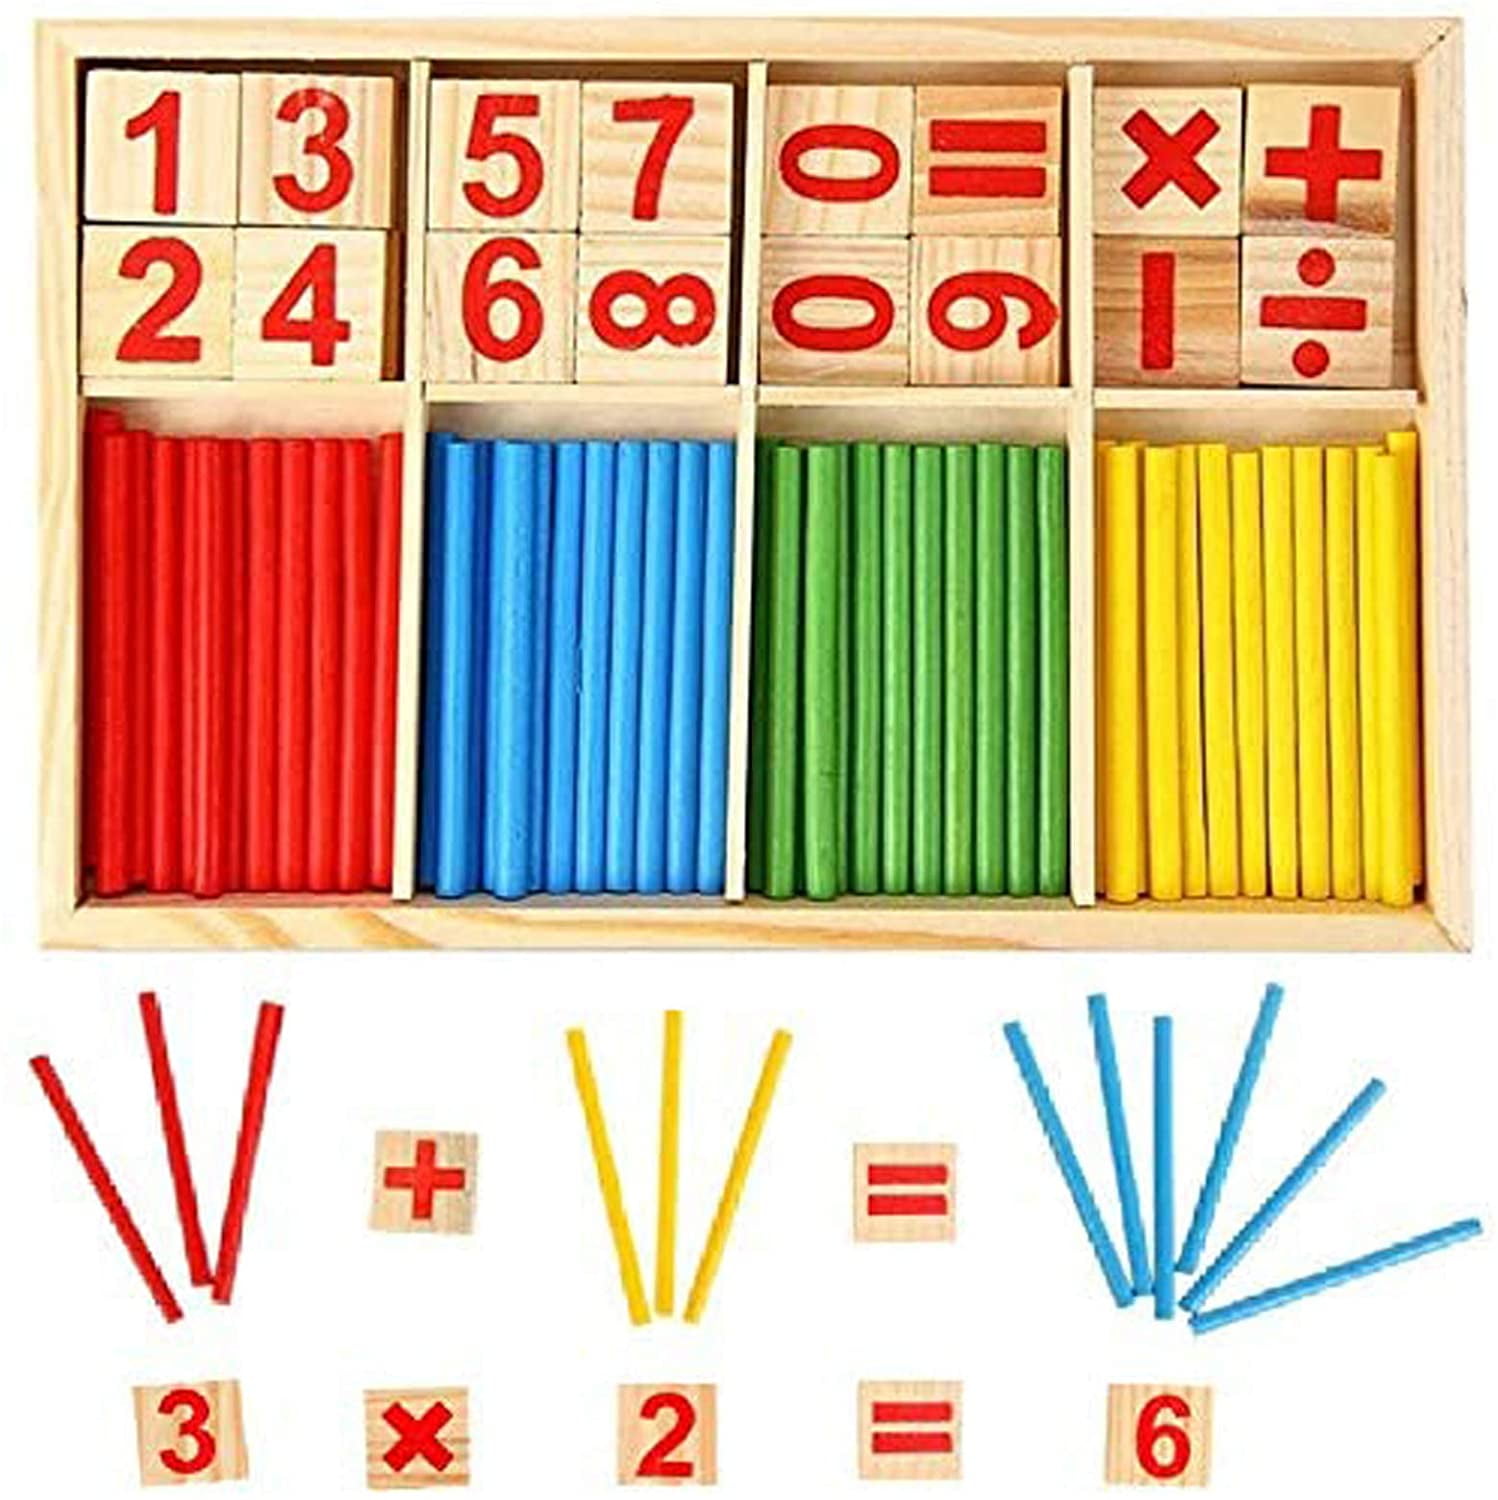 Kids Wooden Counting Sticks Calculation Math Educational Toy Teaching Tools 